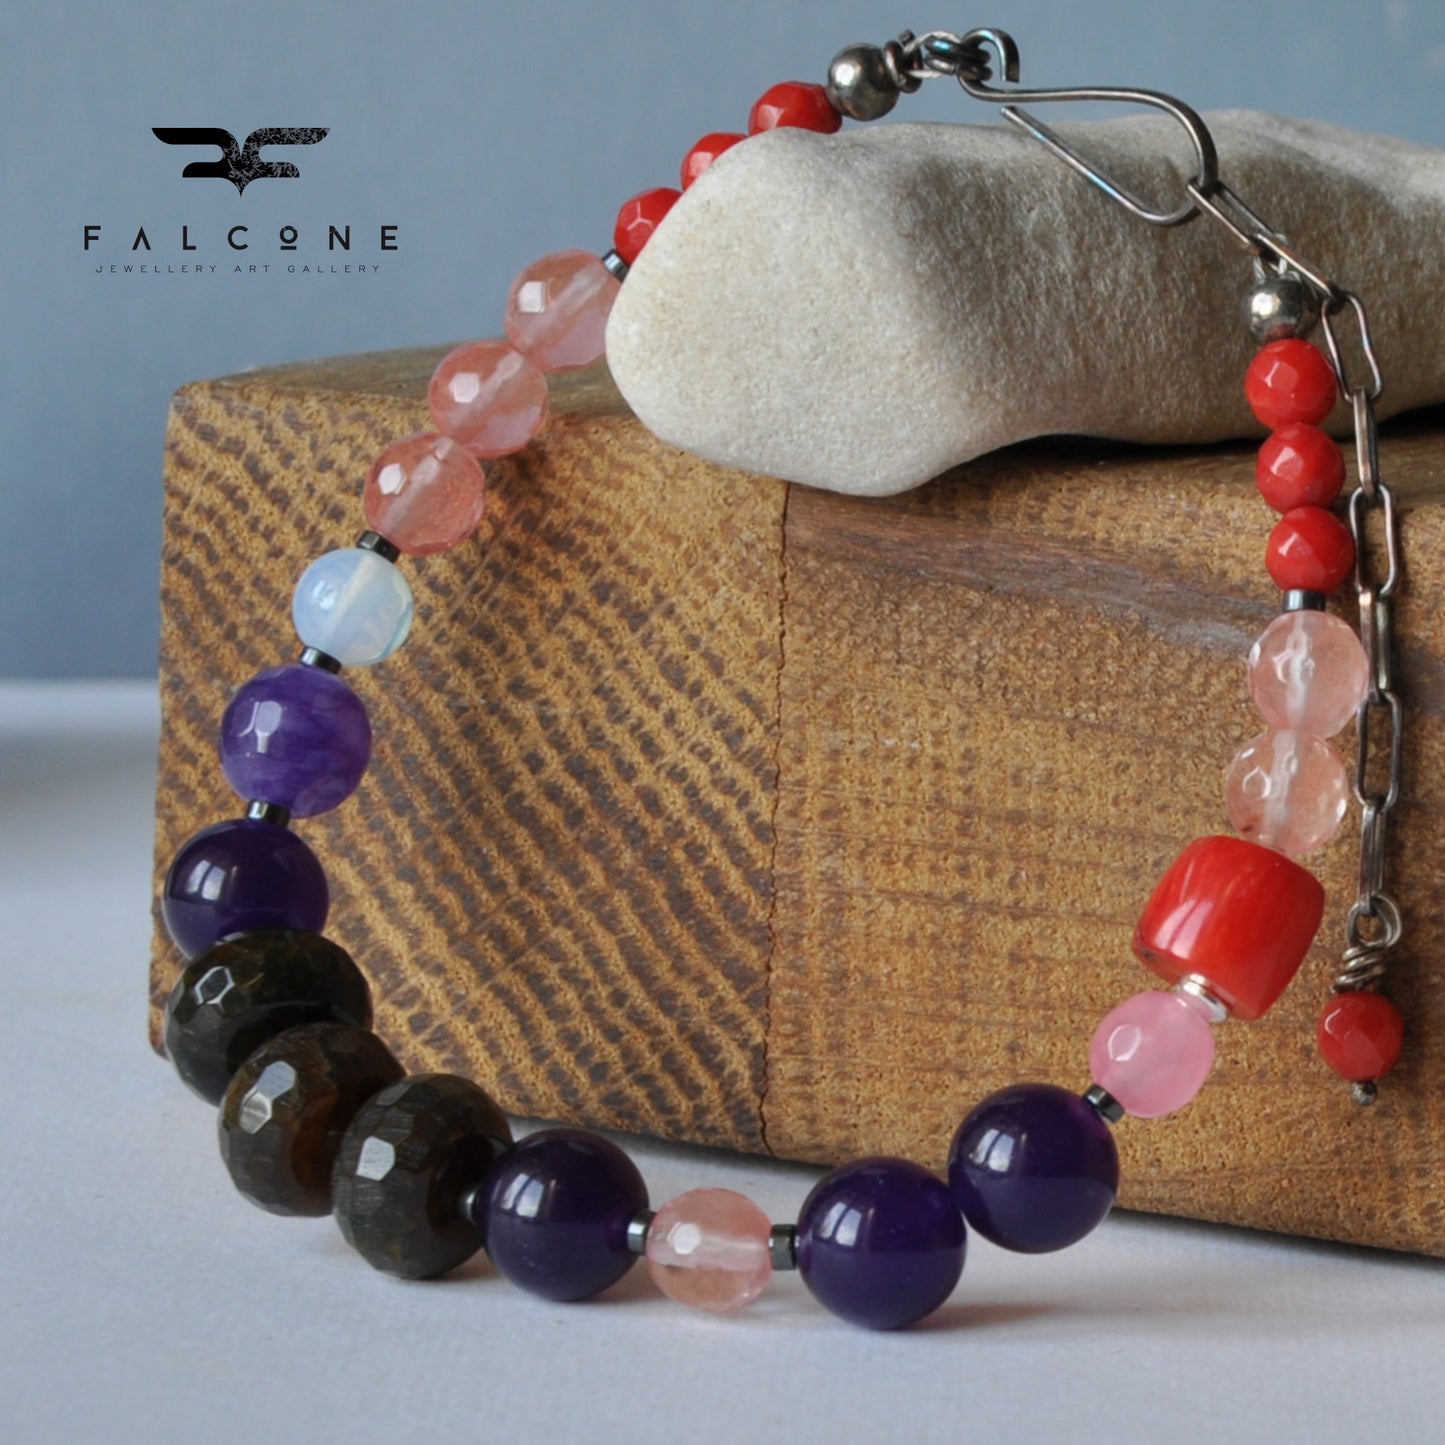 Adjustable bracelet of agates, quartz, opalite and red coral 'Purple and Coral'